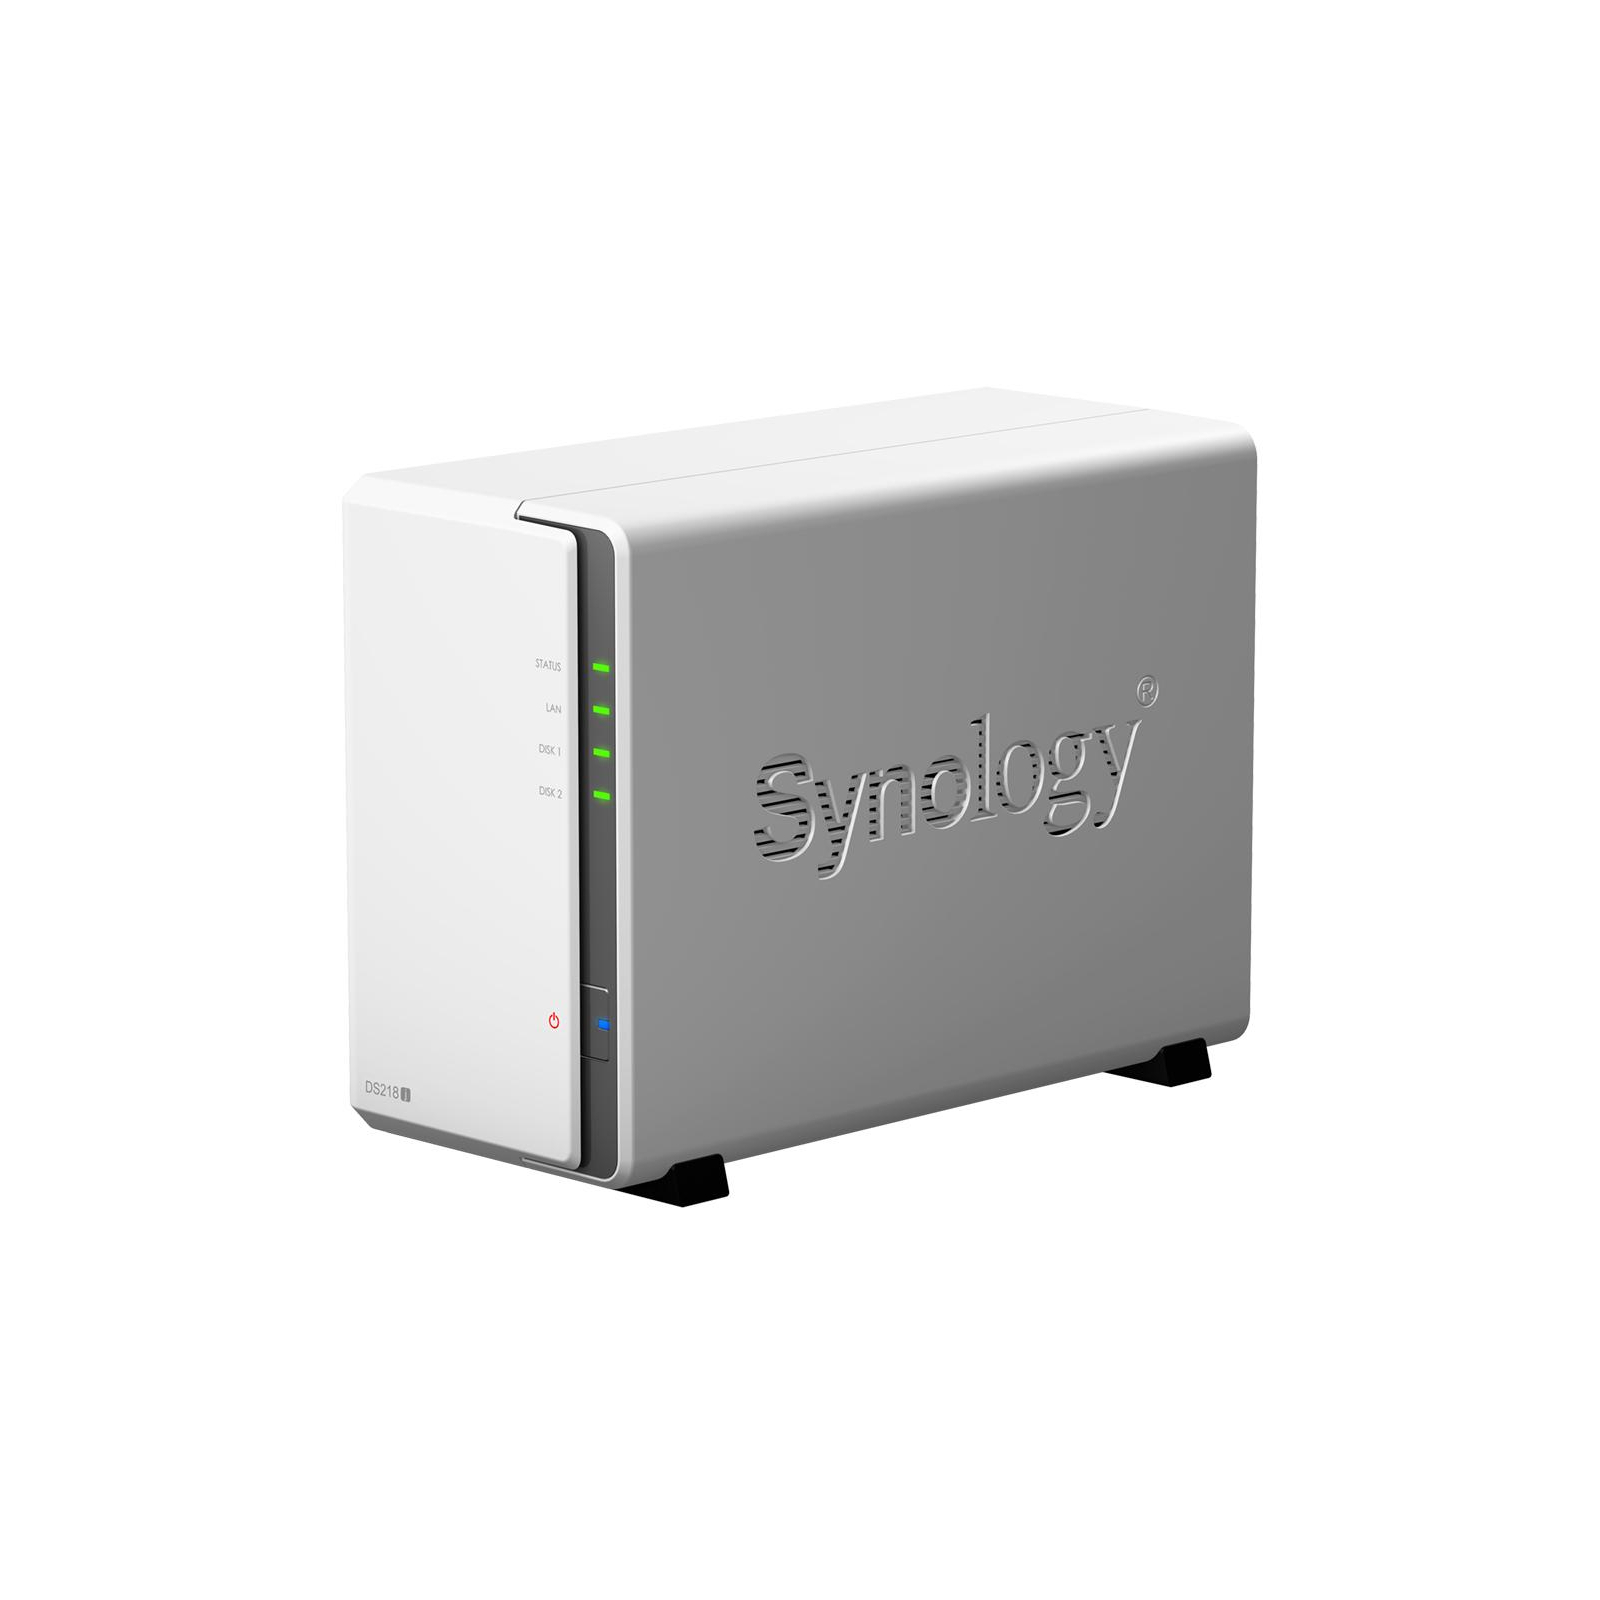 NAS Synology DS218j